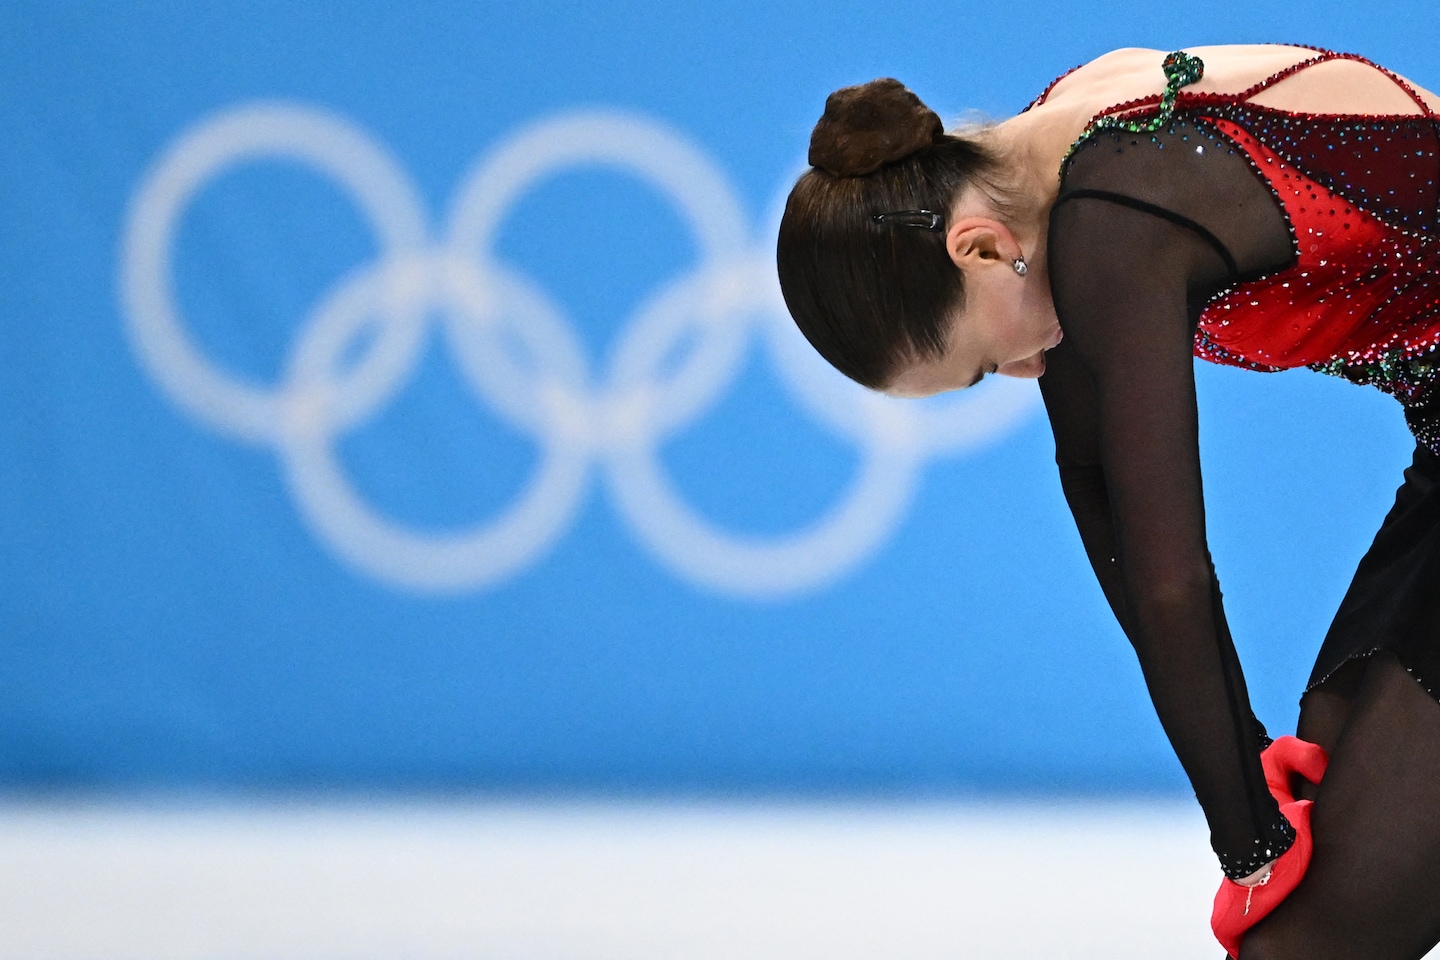 With Kamila Valieva banned, Russian skaters get bronze and everyone’s mad